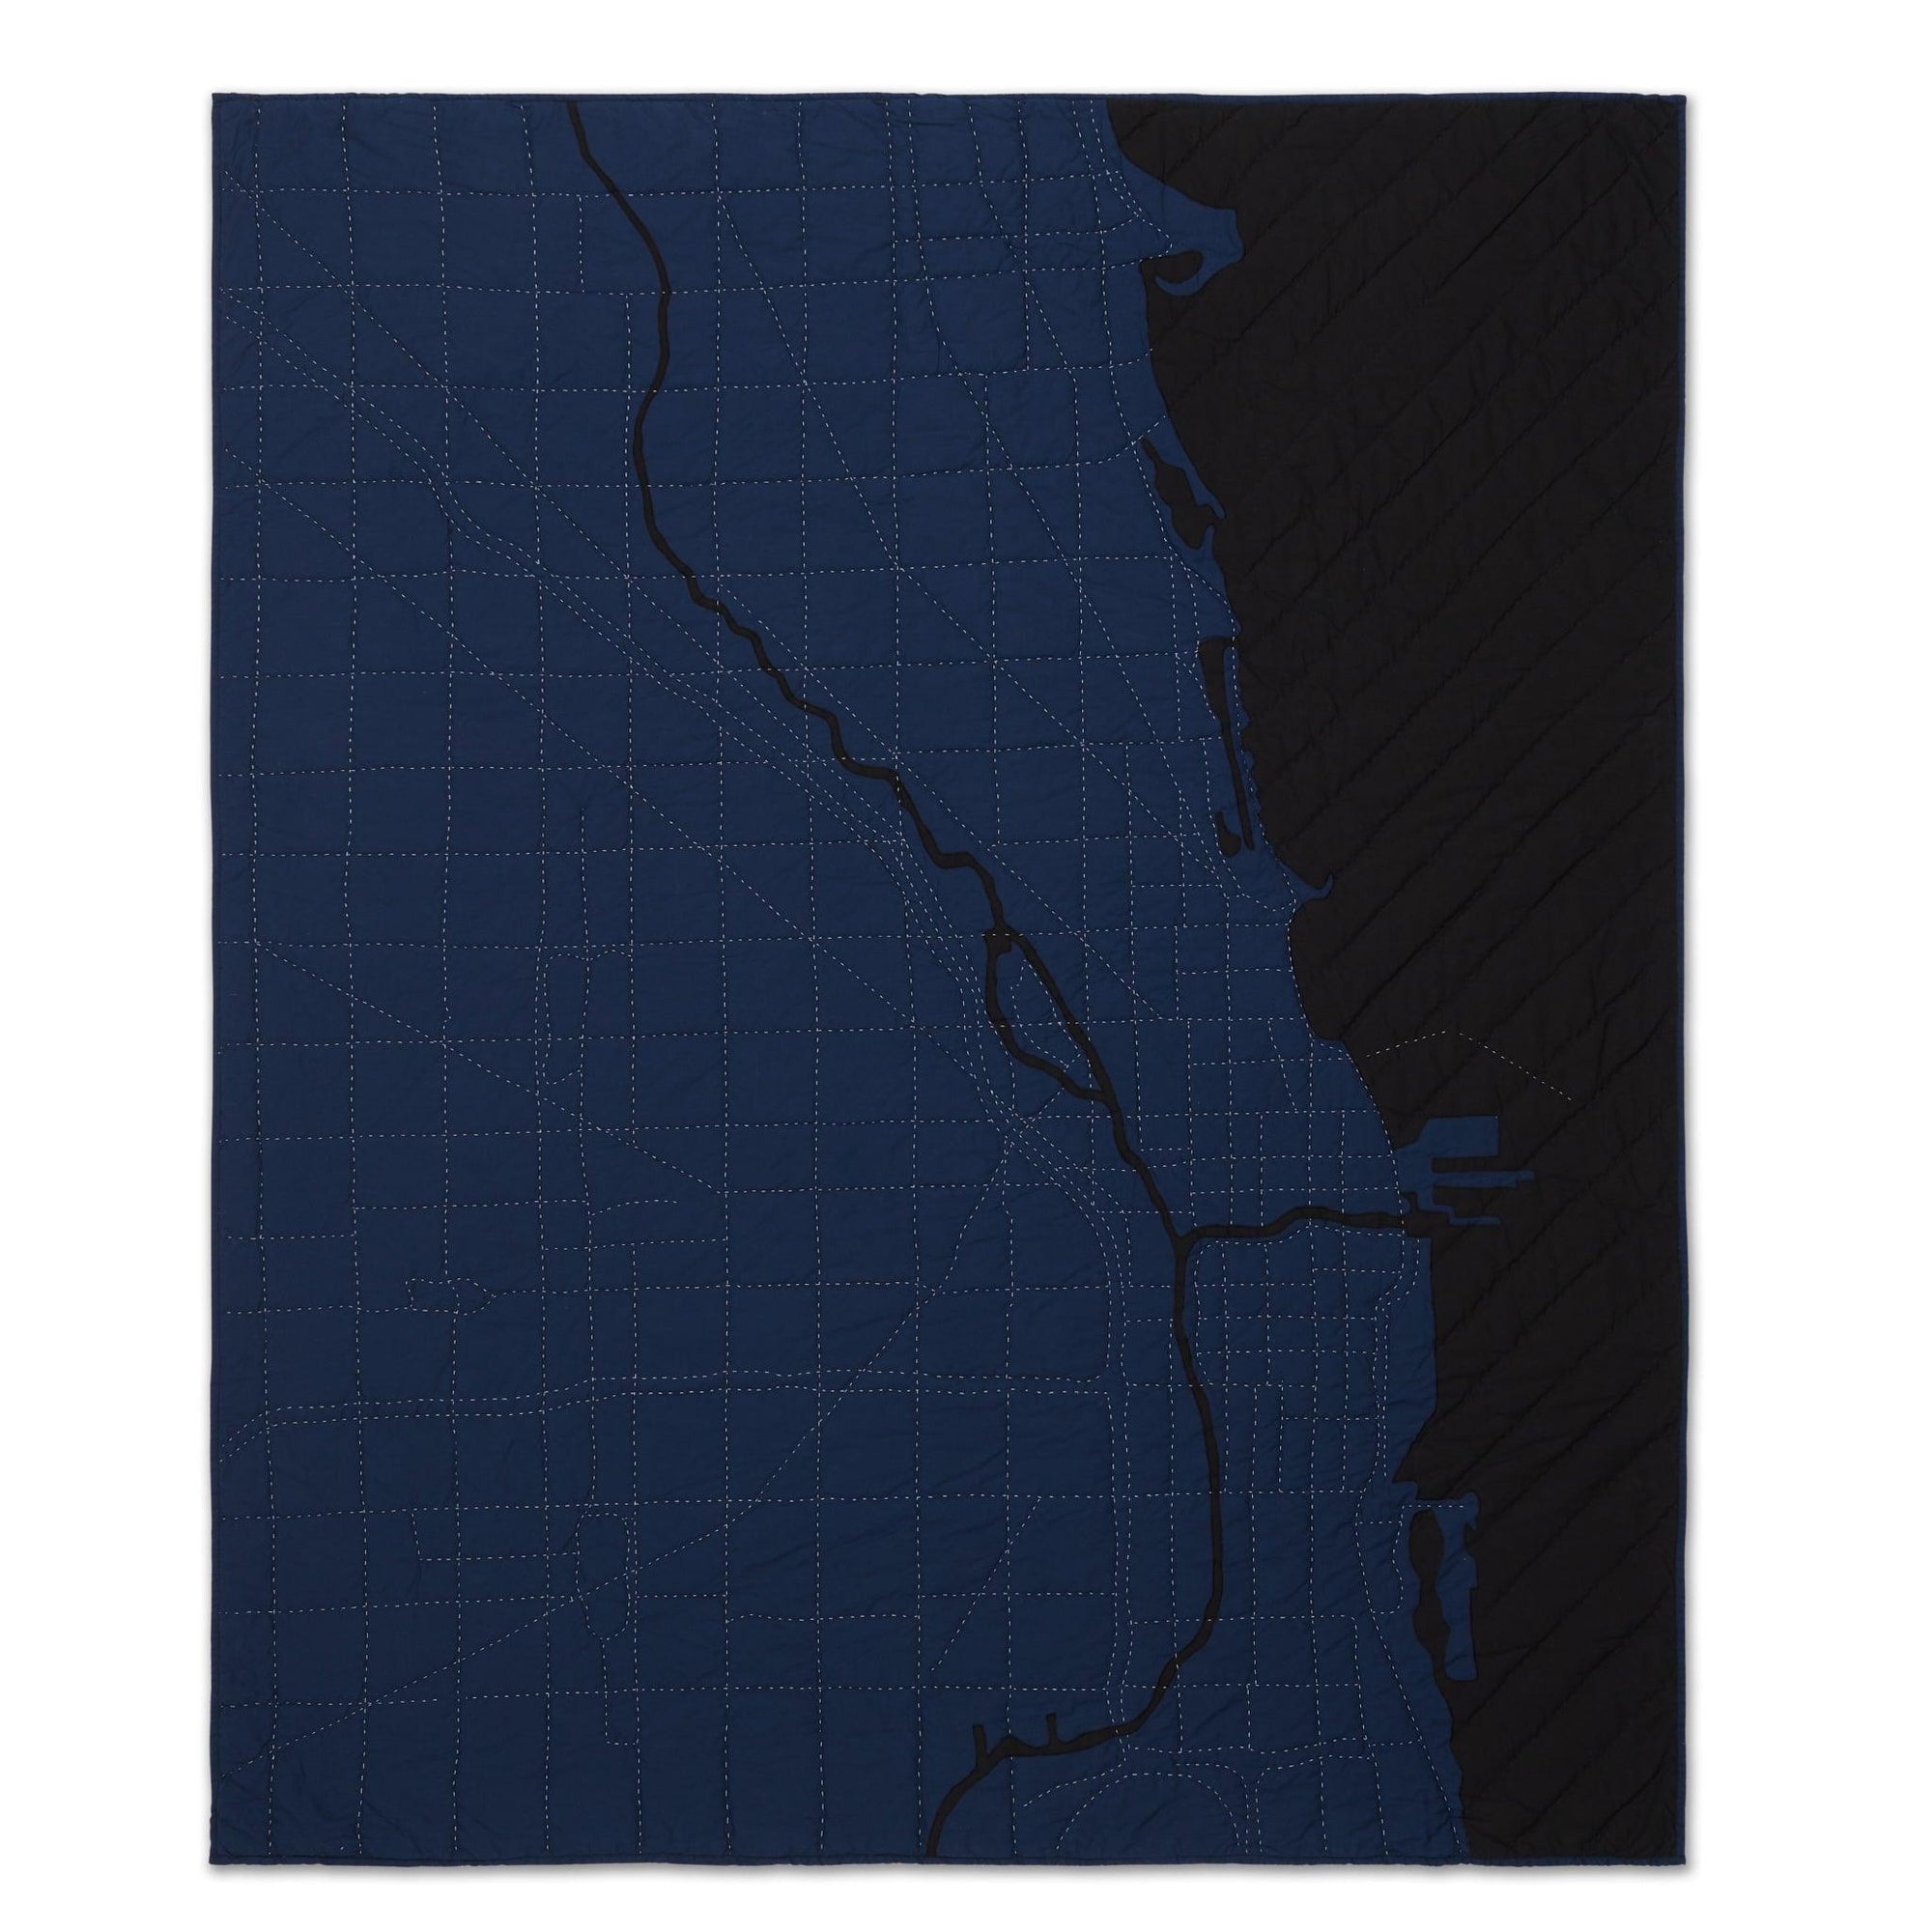 Heirloom quilt, a hand-stitched map of Chicago with dark blue land and black water.